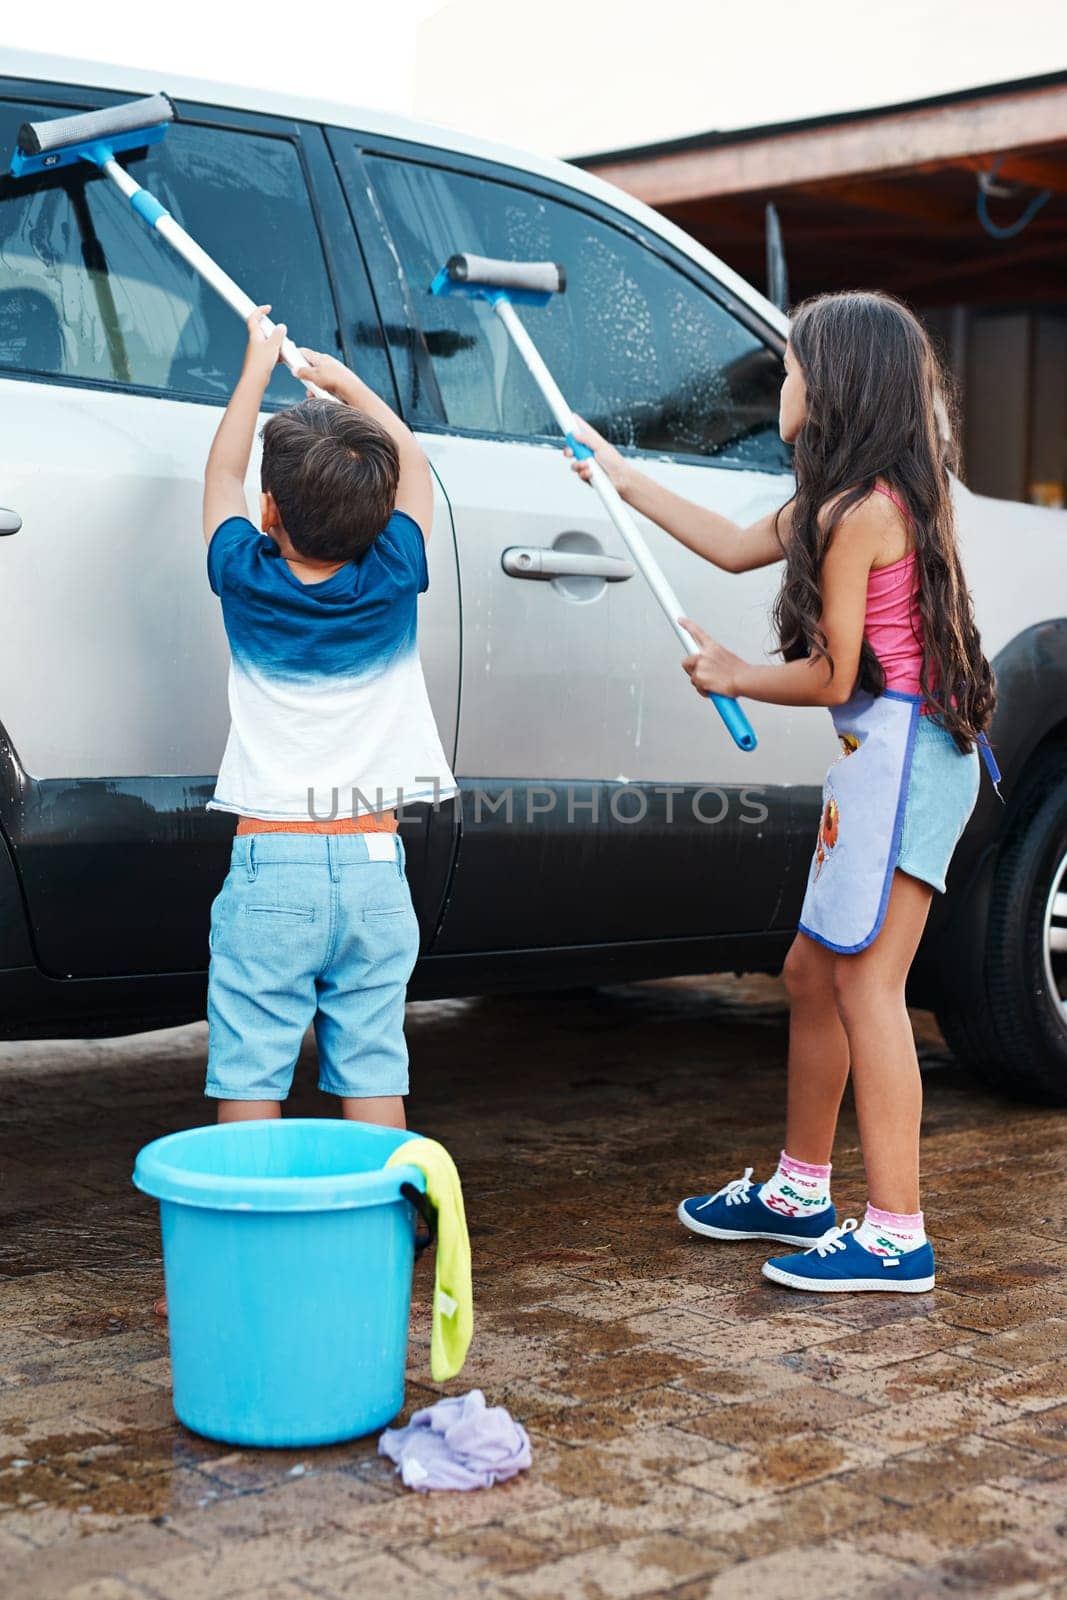 Children, clean and home or washing car, kids and motor vehicle with equipment for windows. Siblings, driveway and helping with responsibility together on weekend, outdoor for chore with bucket.